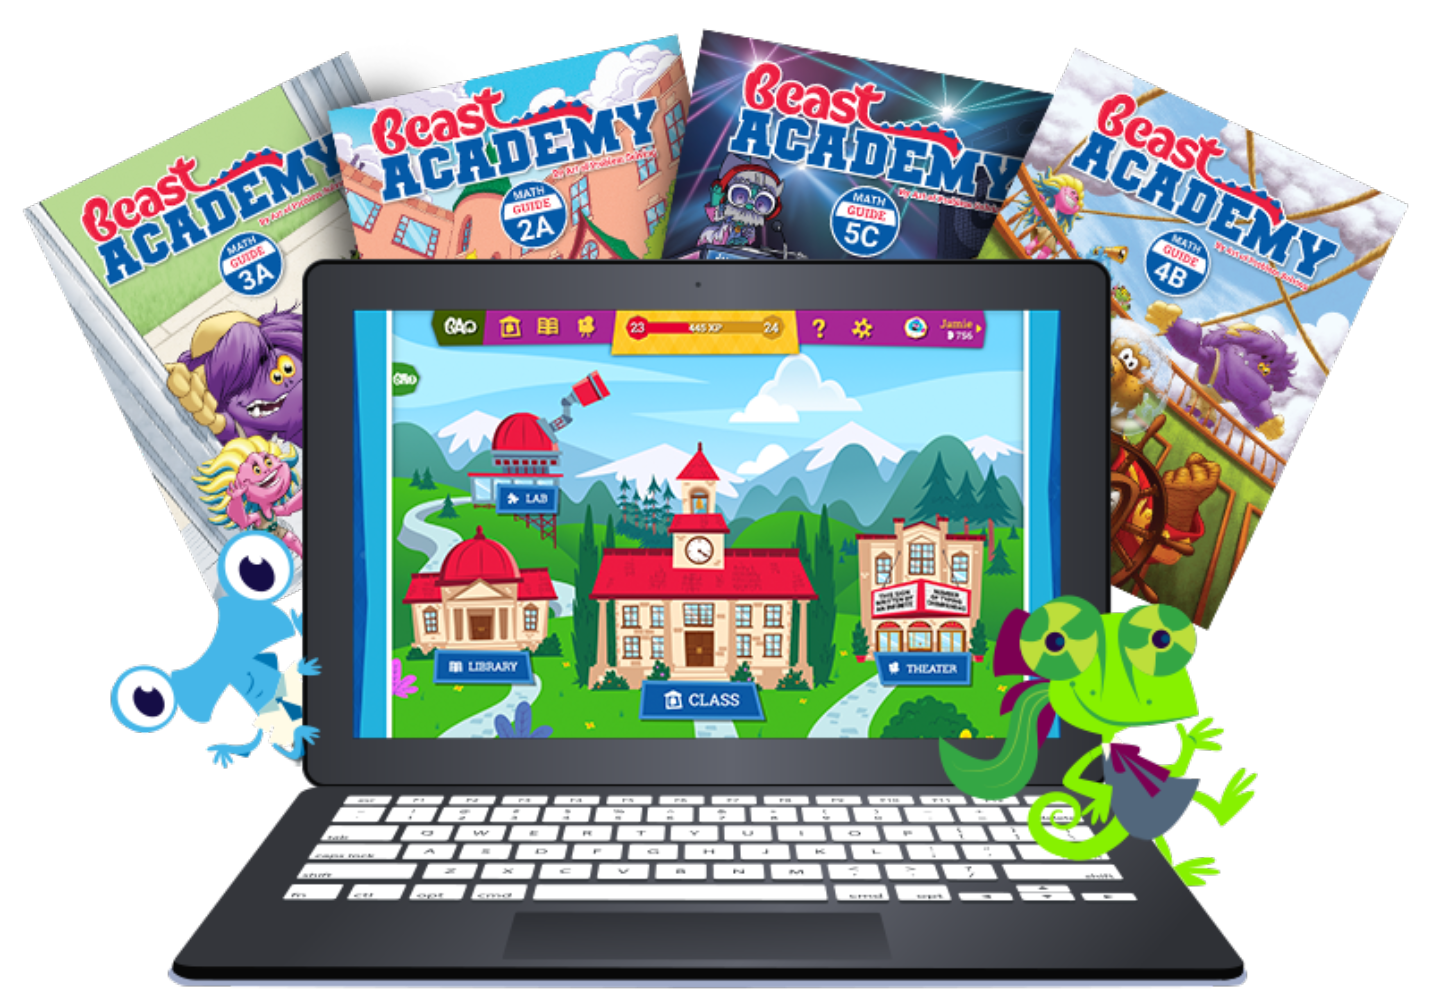 Beast Academy Online and books